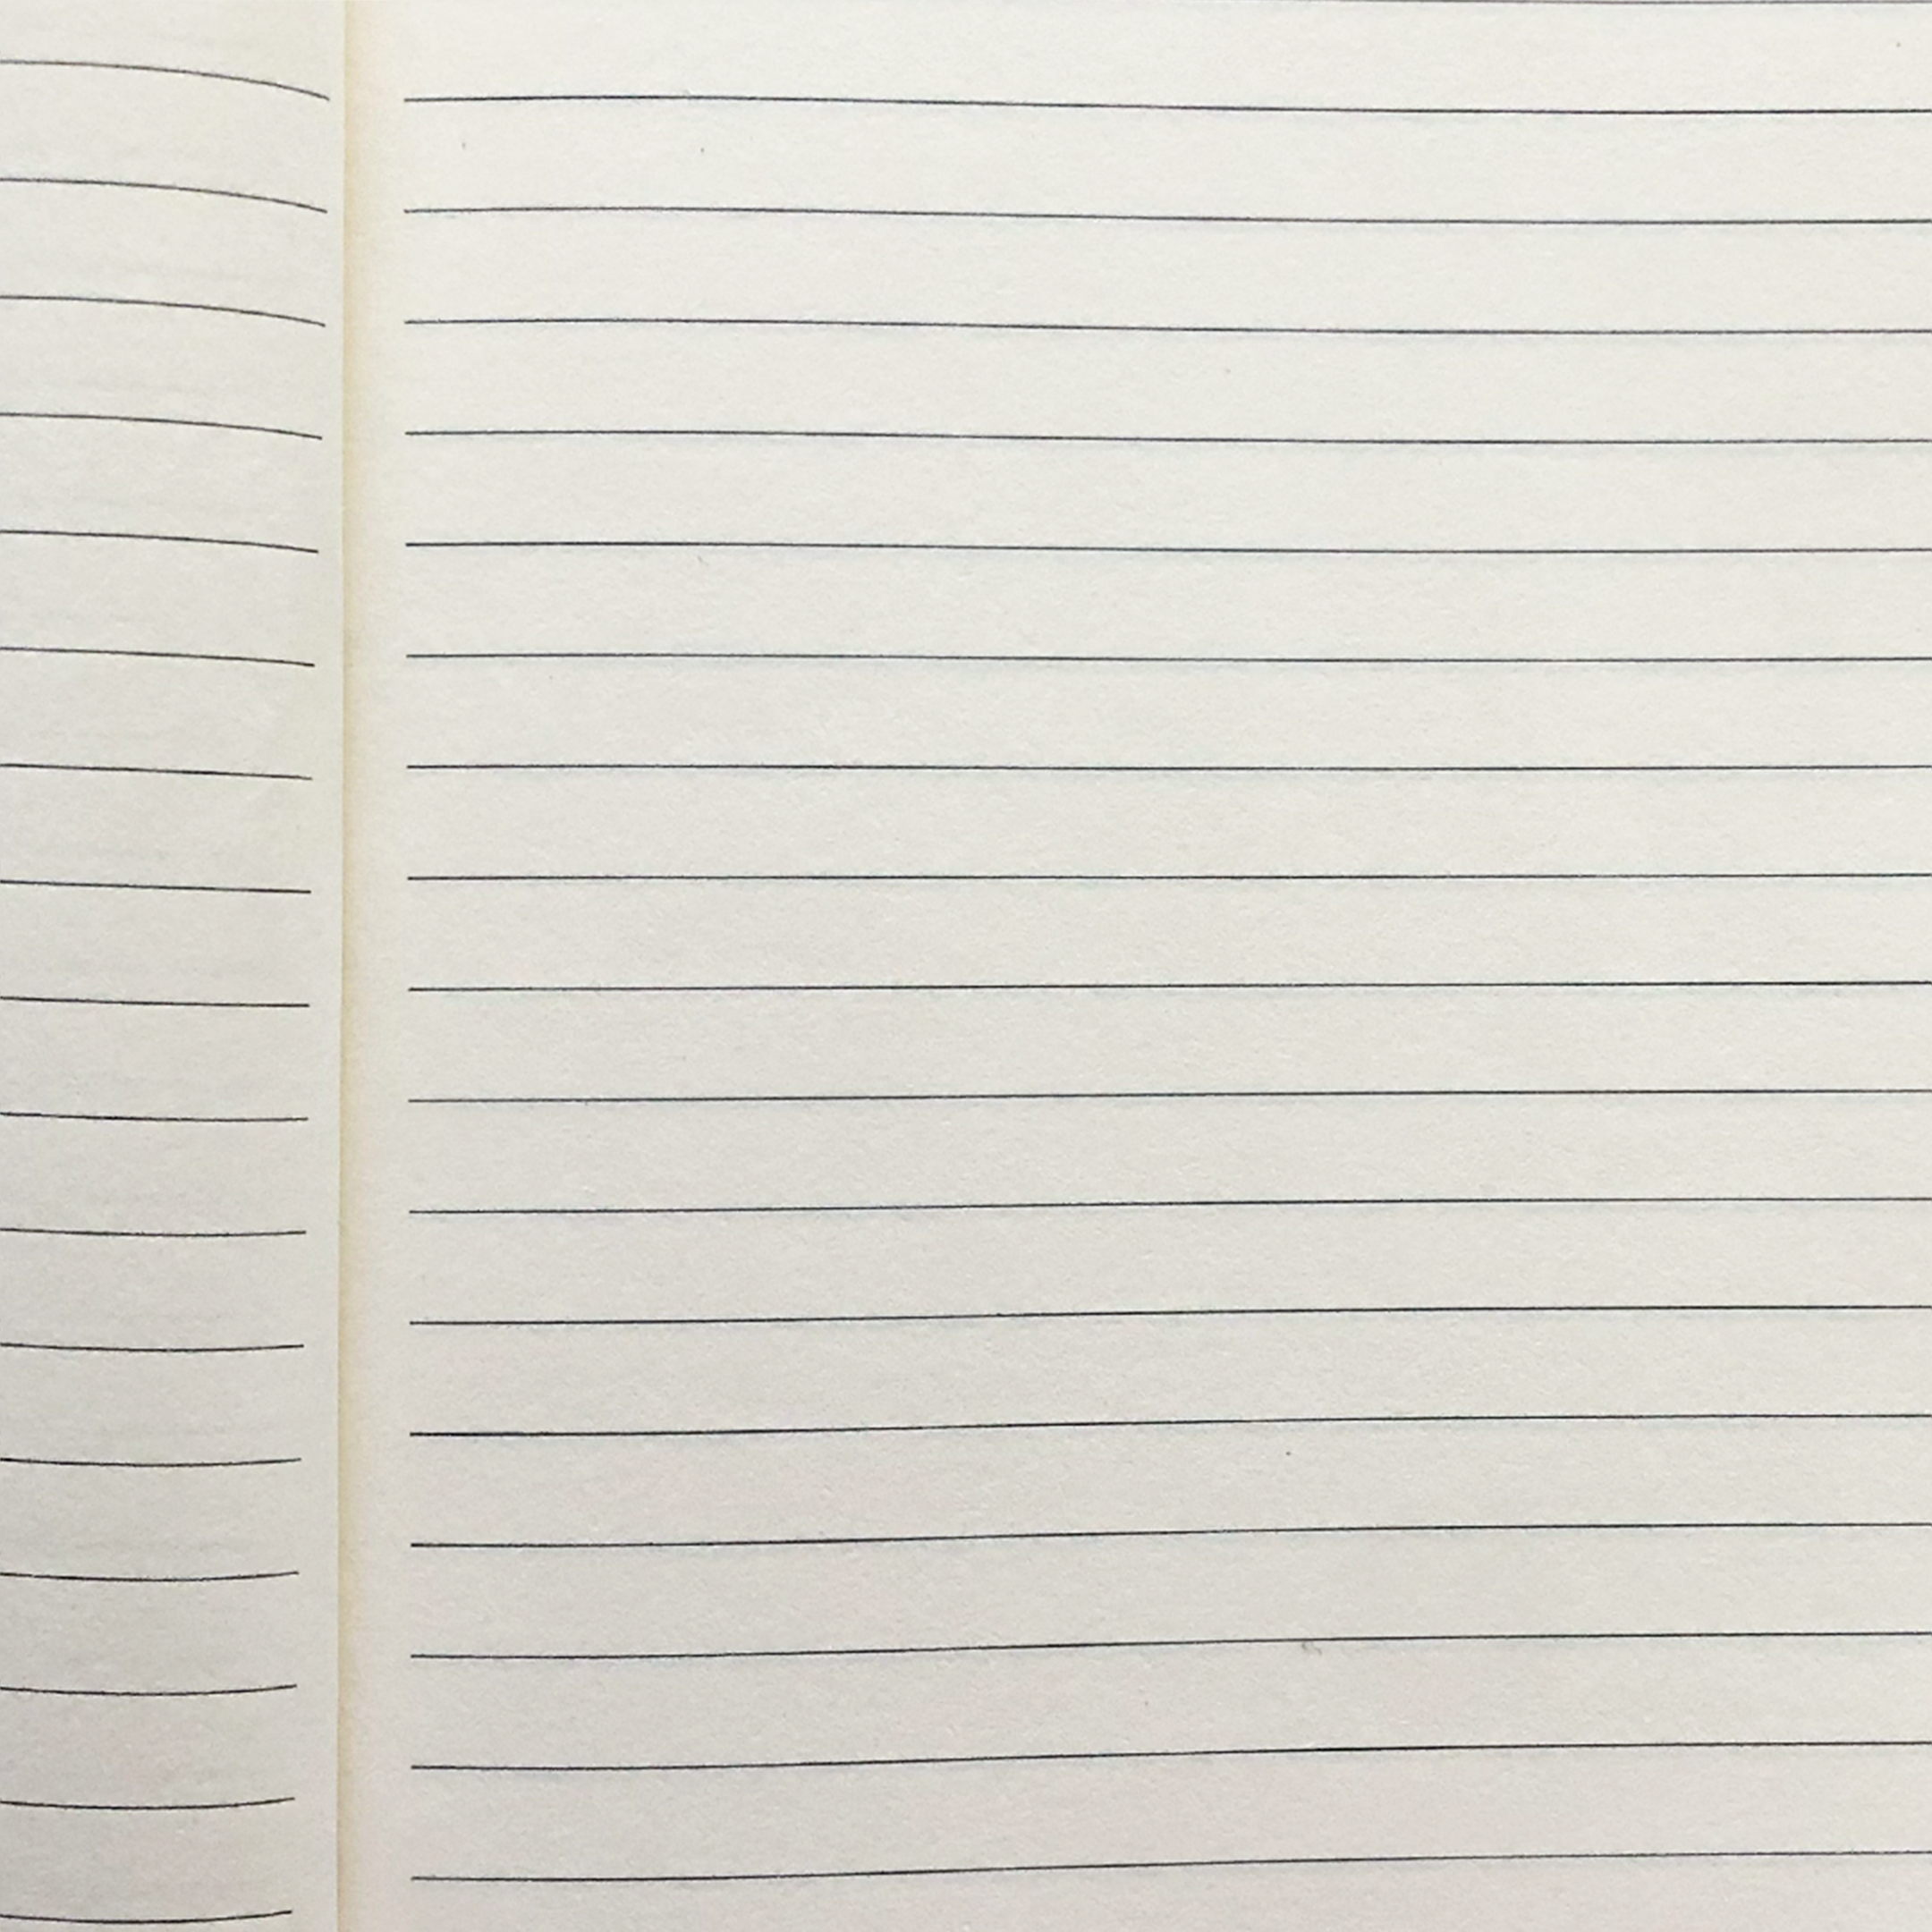 Image shows lined pages inside an A5 journal